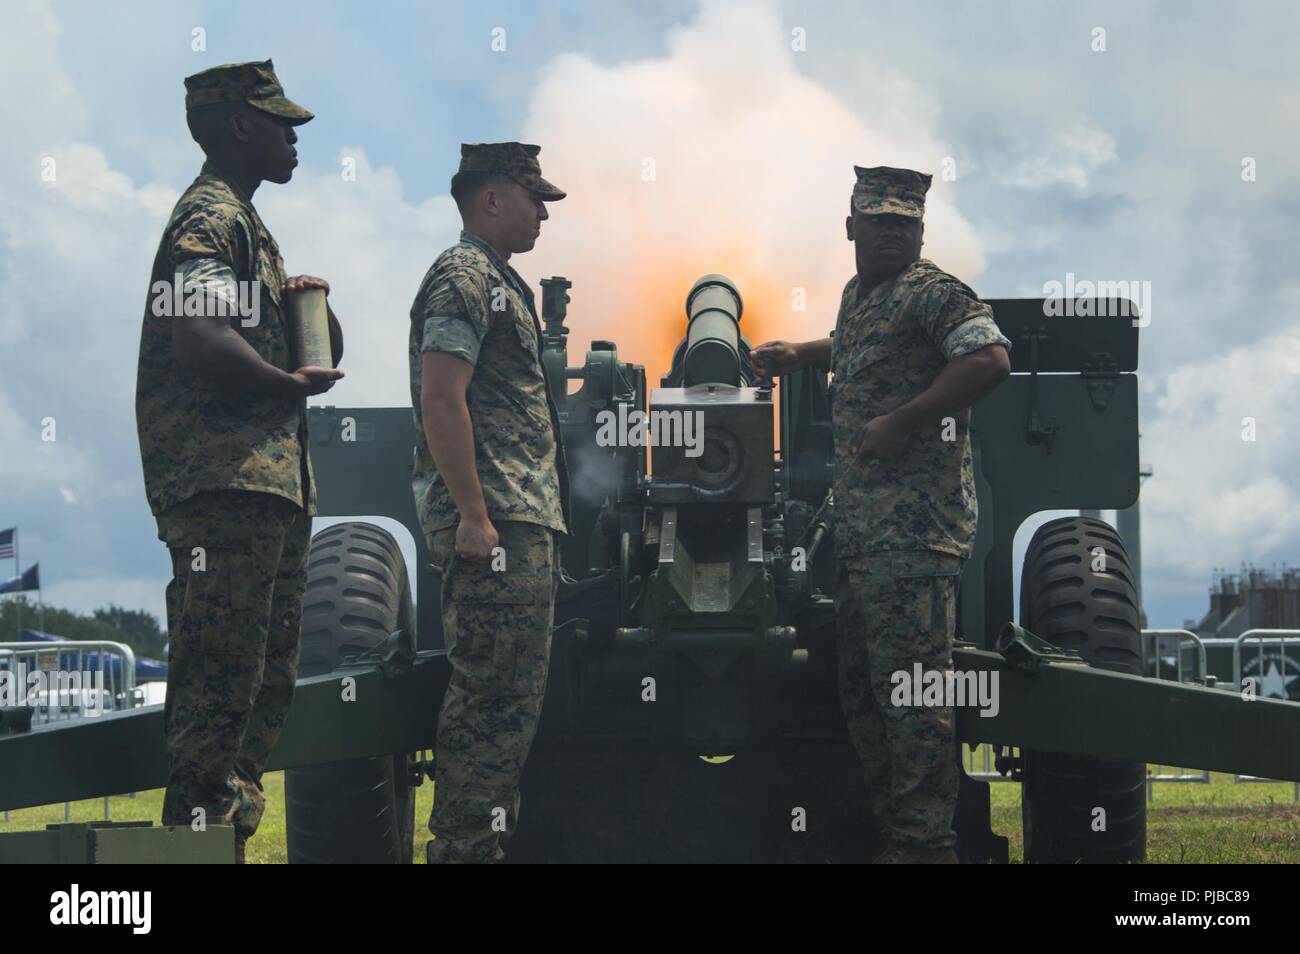 Marines with 2nd Battalion 10th Marine Regiment, 2nd Marine Division, march at William Pendleton Thomas Field on Marine Corps Base Camp Lejeune,  N.C., July 4, 2018. From 1776 to present day, July fourth has been adopted as the birth of American Independence, later on becoming a national holiday in 1870 by Congress. This year also marks the 77th anniversary of MCB Camp Lejeune. Stock Photo